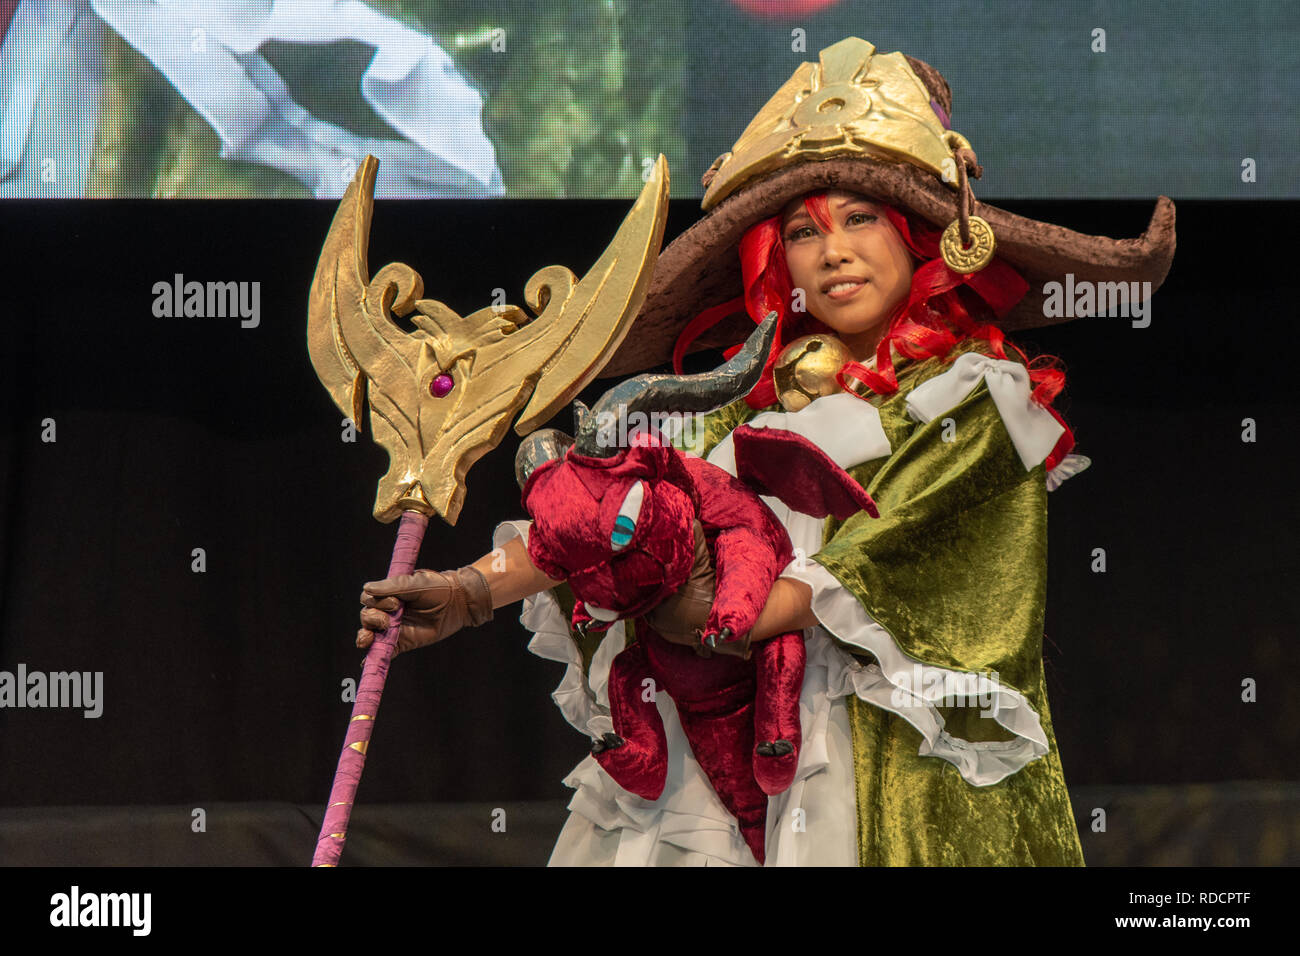 STUTTGART, GERMANY - JUN 30th 2018: Cosplay Contest - Dragon Trainer Lulu  by Sunnyma Cosplay at Comic Con Germany Stuttgart Stock Photo - Alamy